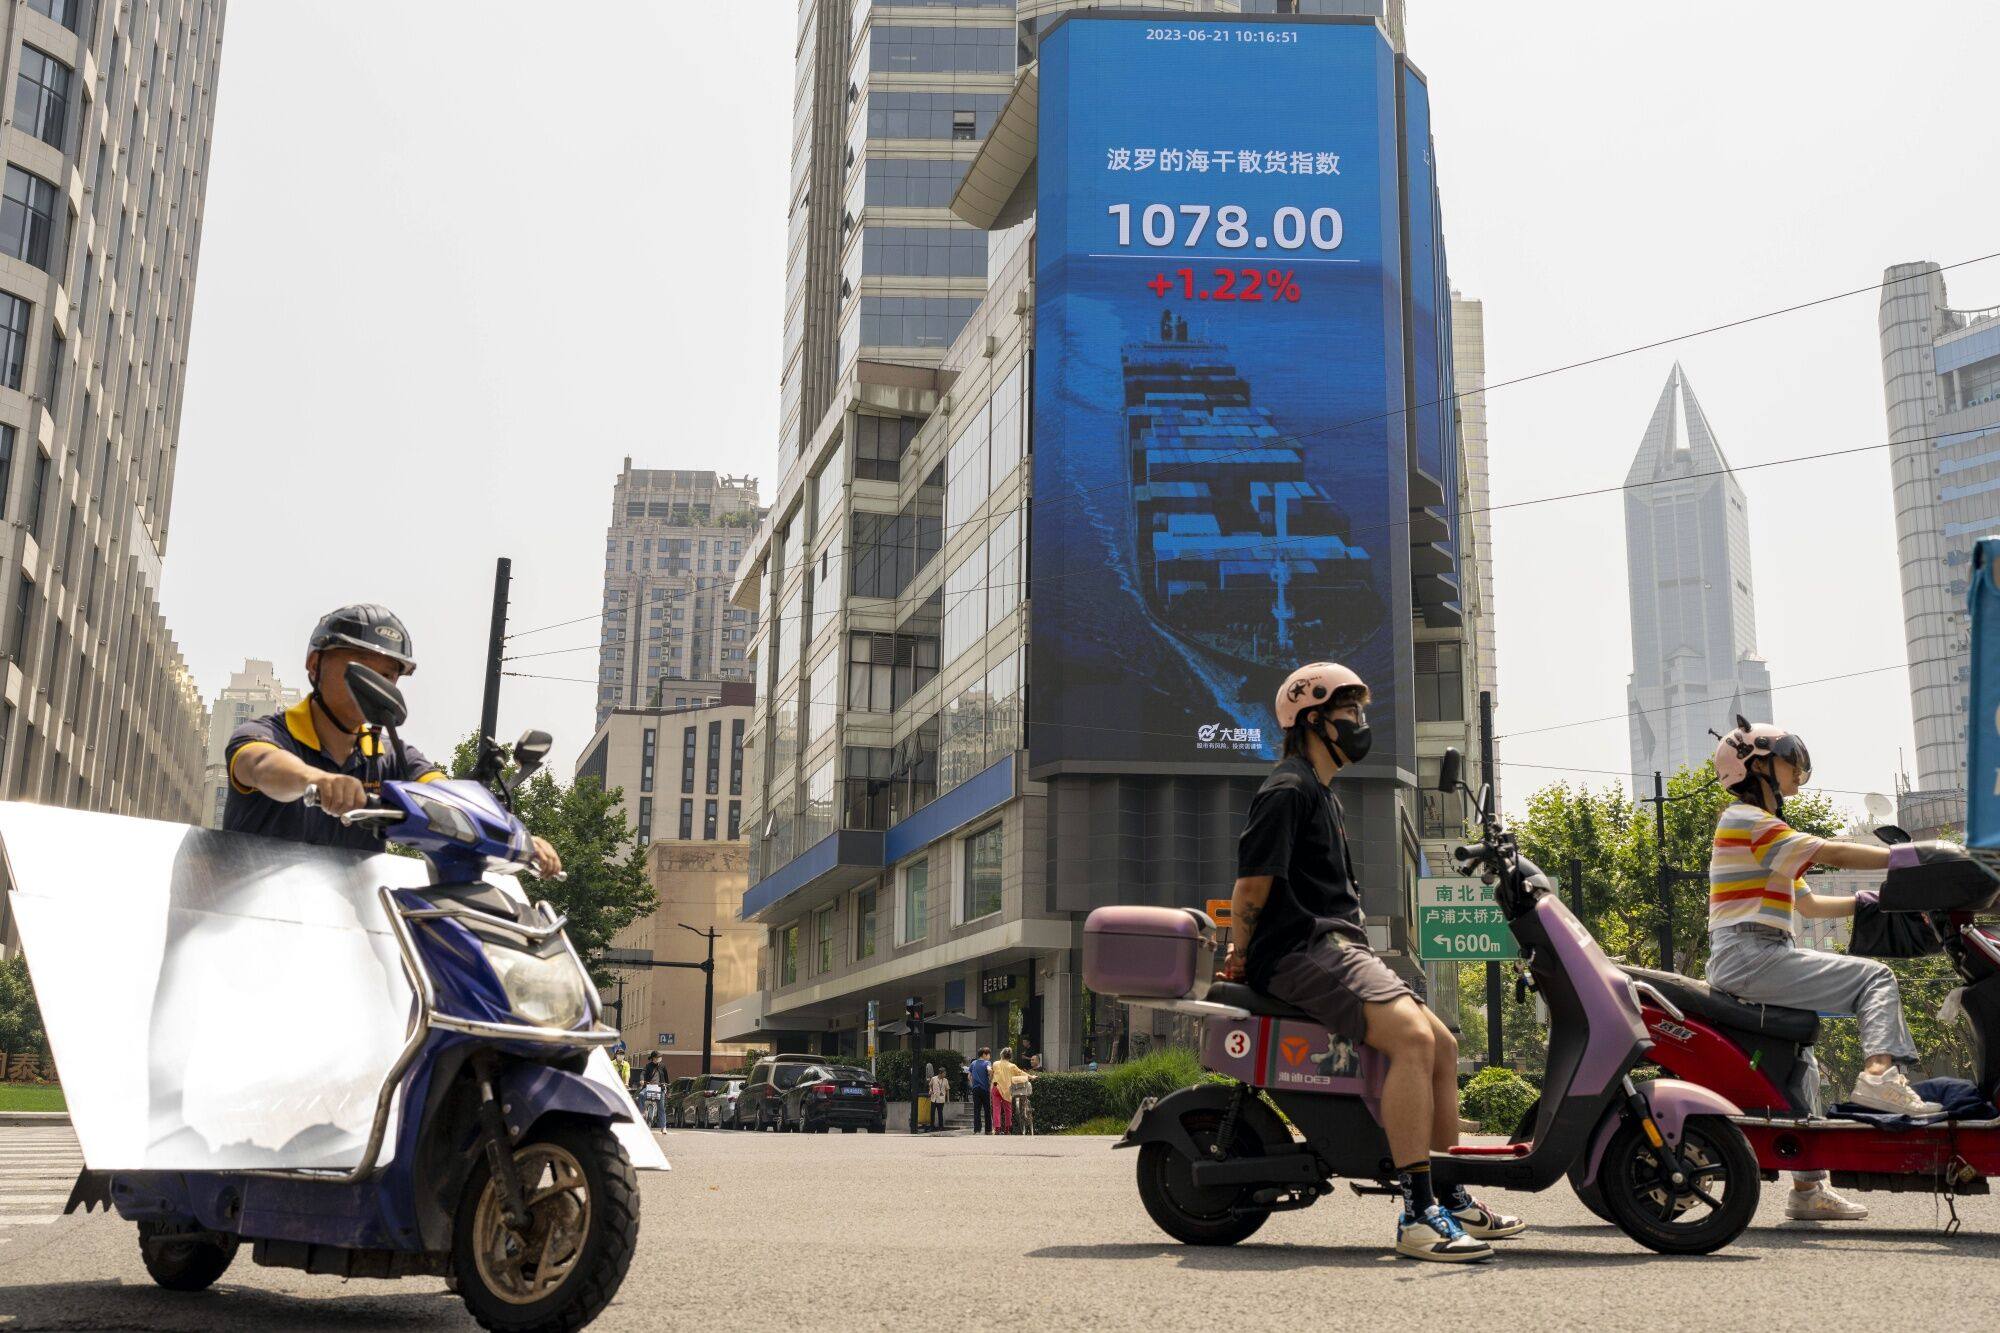 A public screen displaying stock figures in Pudong’s Lujiazui Financial District n Shanghai on June 21. Photo: Bloomberg